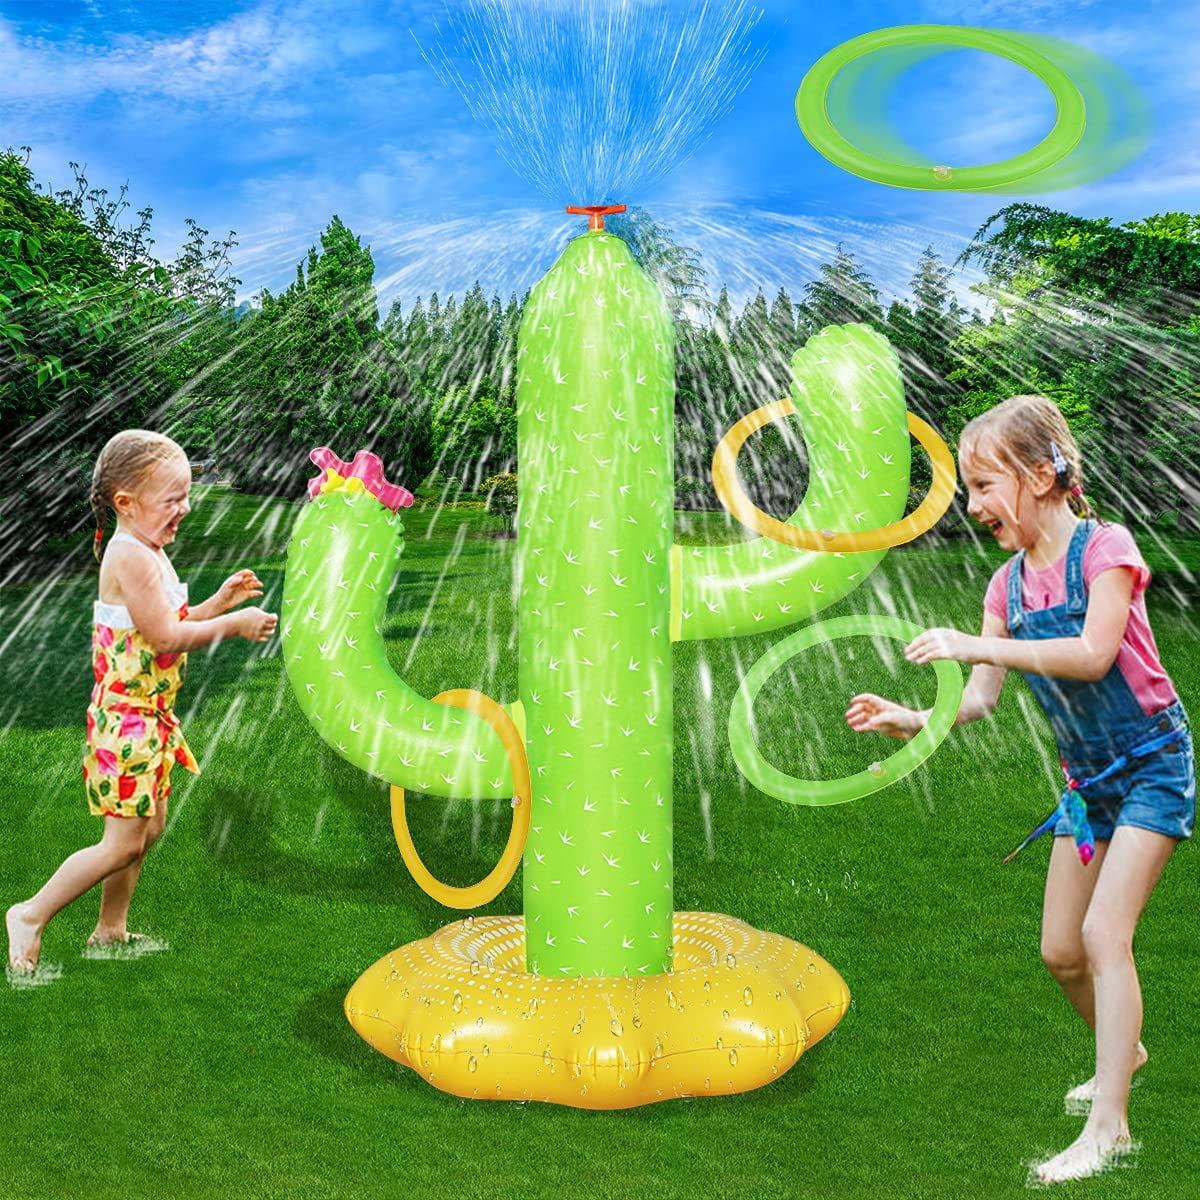 Water for Sprinkler Backyard Sprinkler 3 Toys Spray Cactus and U Ages Fun Girls, Summer Boys Outdoor Cactus 5 Gifts with 4 6 Rings, Years for Inflatable Water for 4 Game Kids, Toy Children